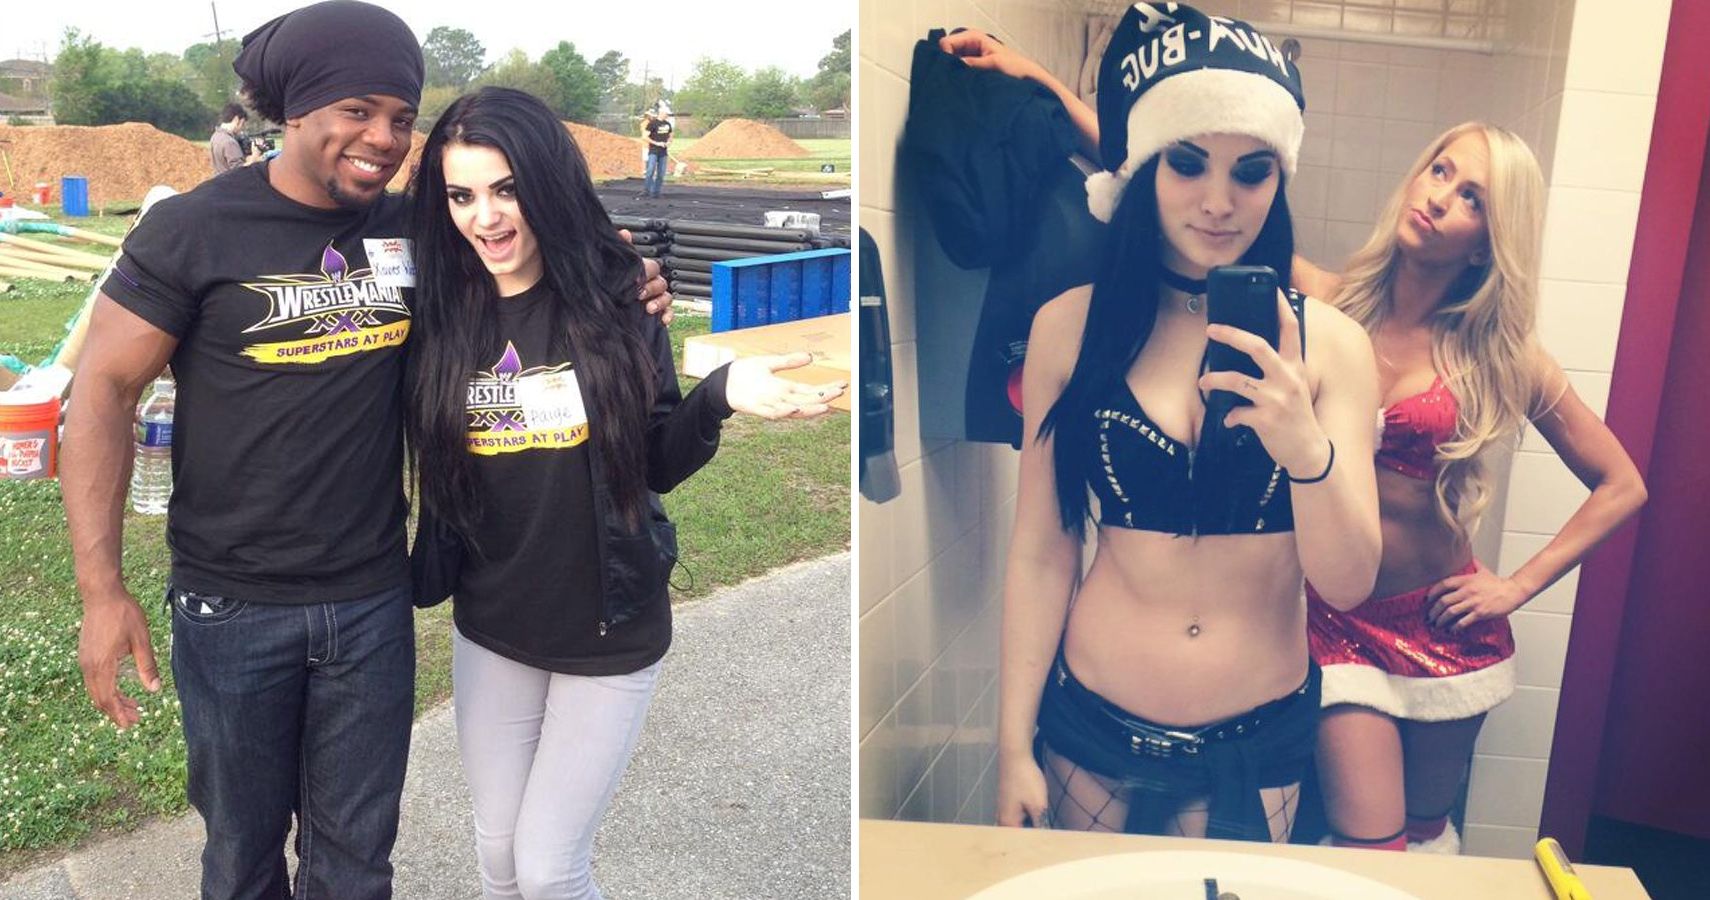 Paige leaked images